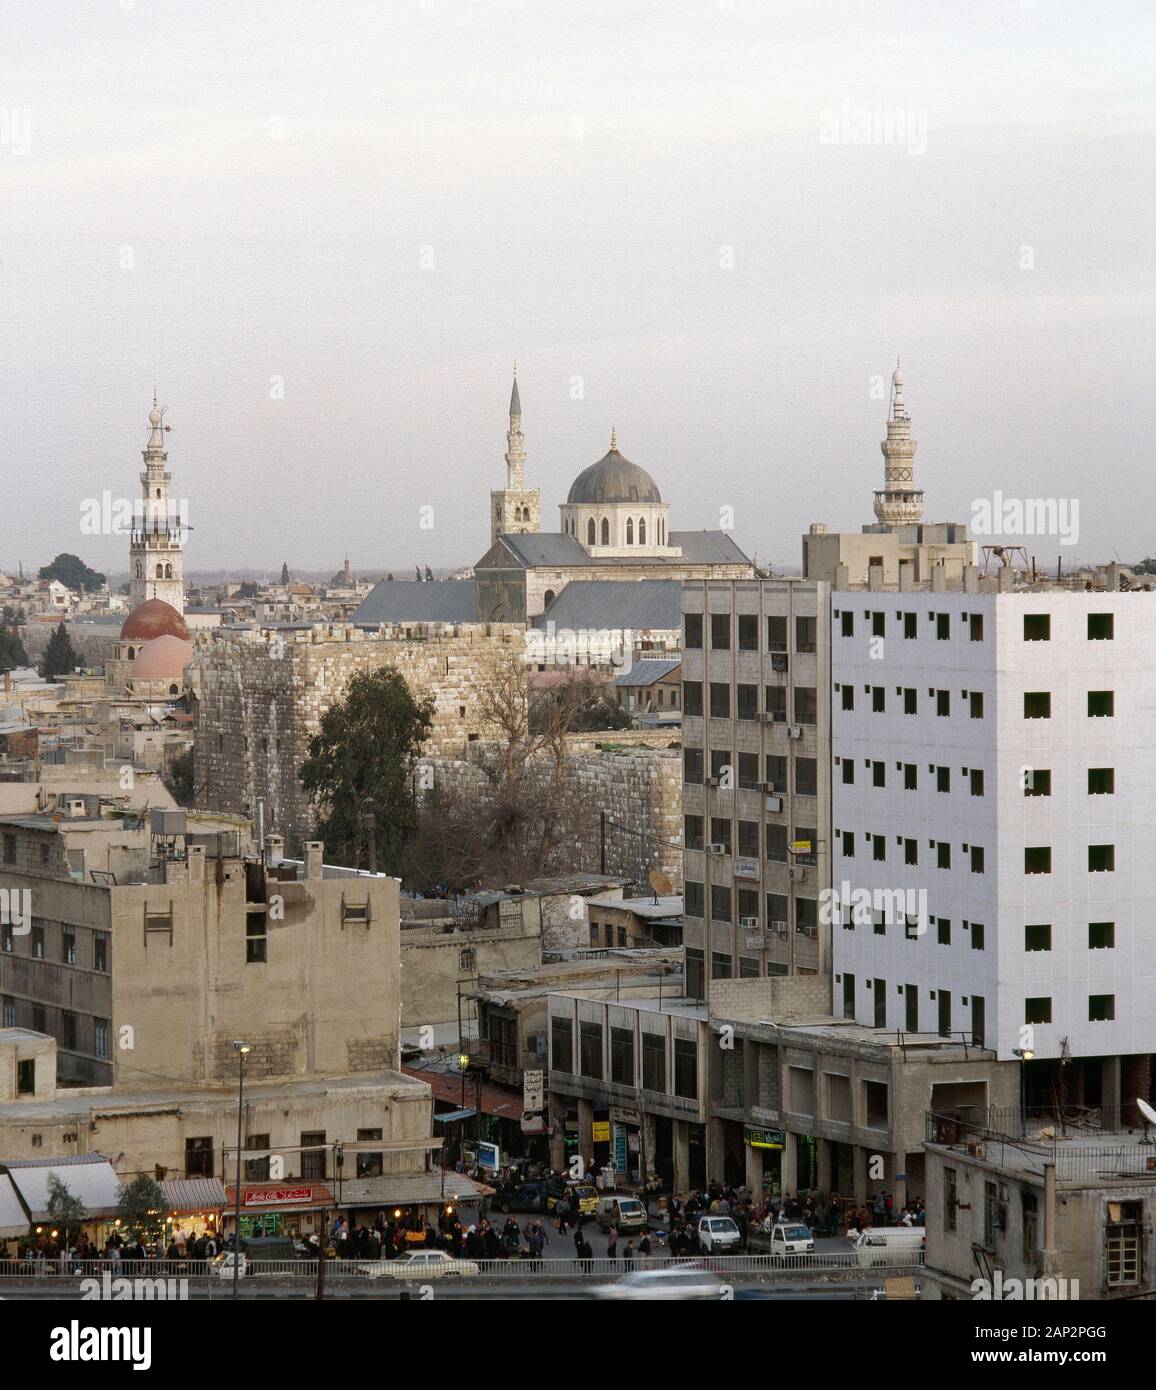 Syrian Arab Republic. Damascus. Aspect of the city at sunset. Photo taken before the Syrian CIvil War. Stock Photo